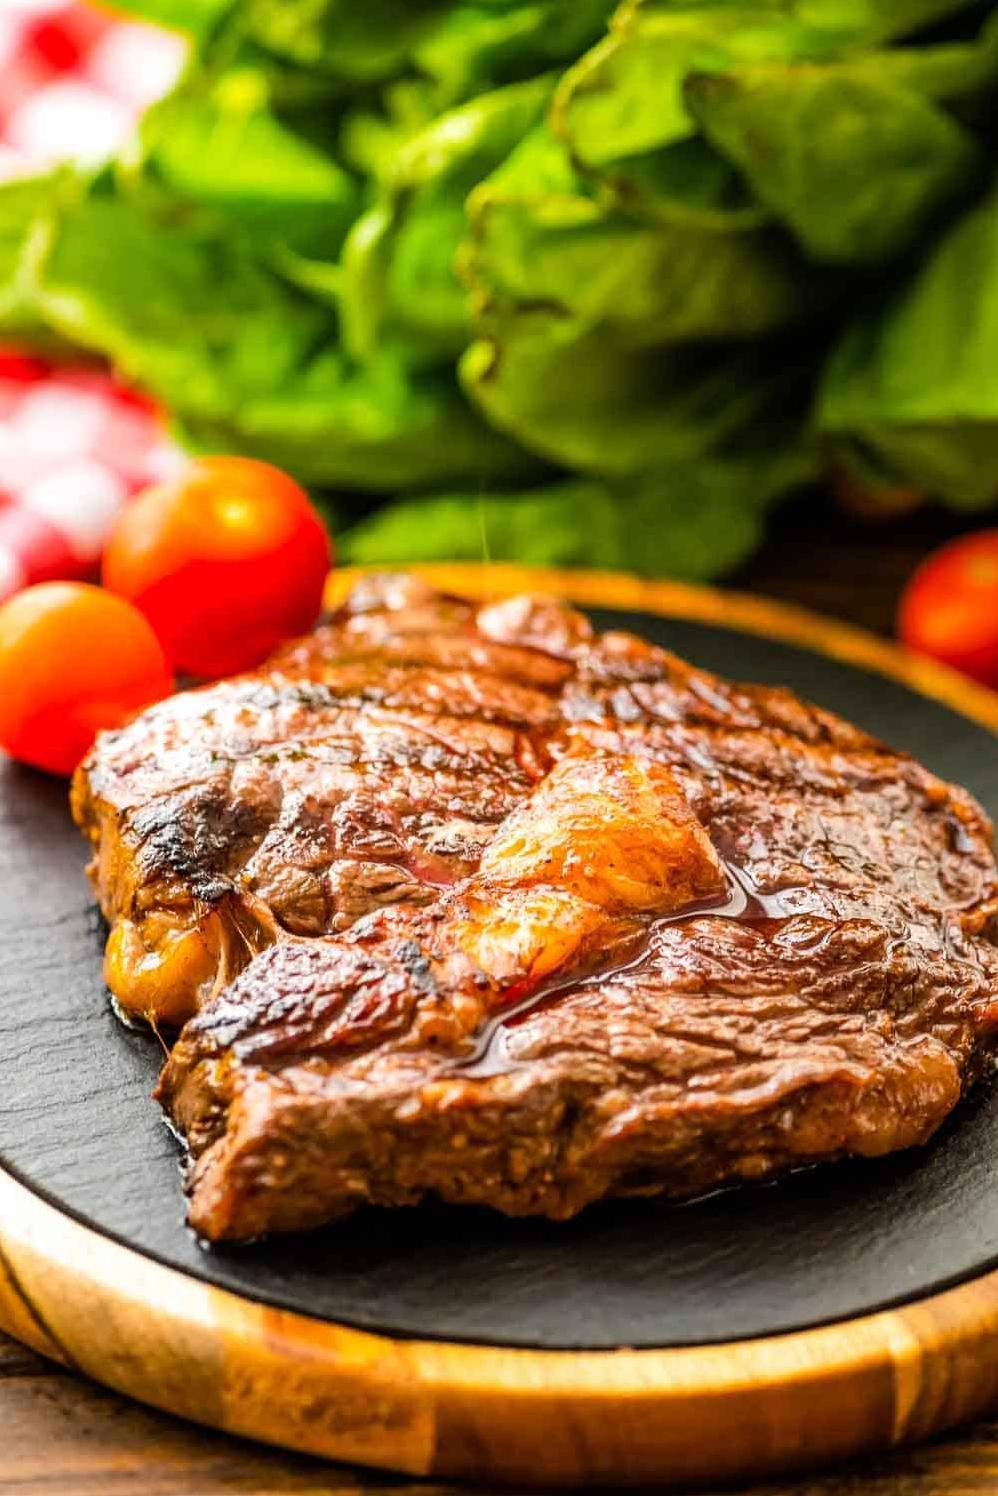  Marinate your beef like a pro with this recipe